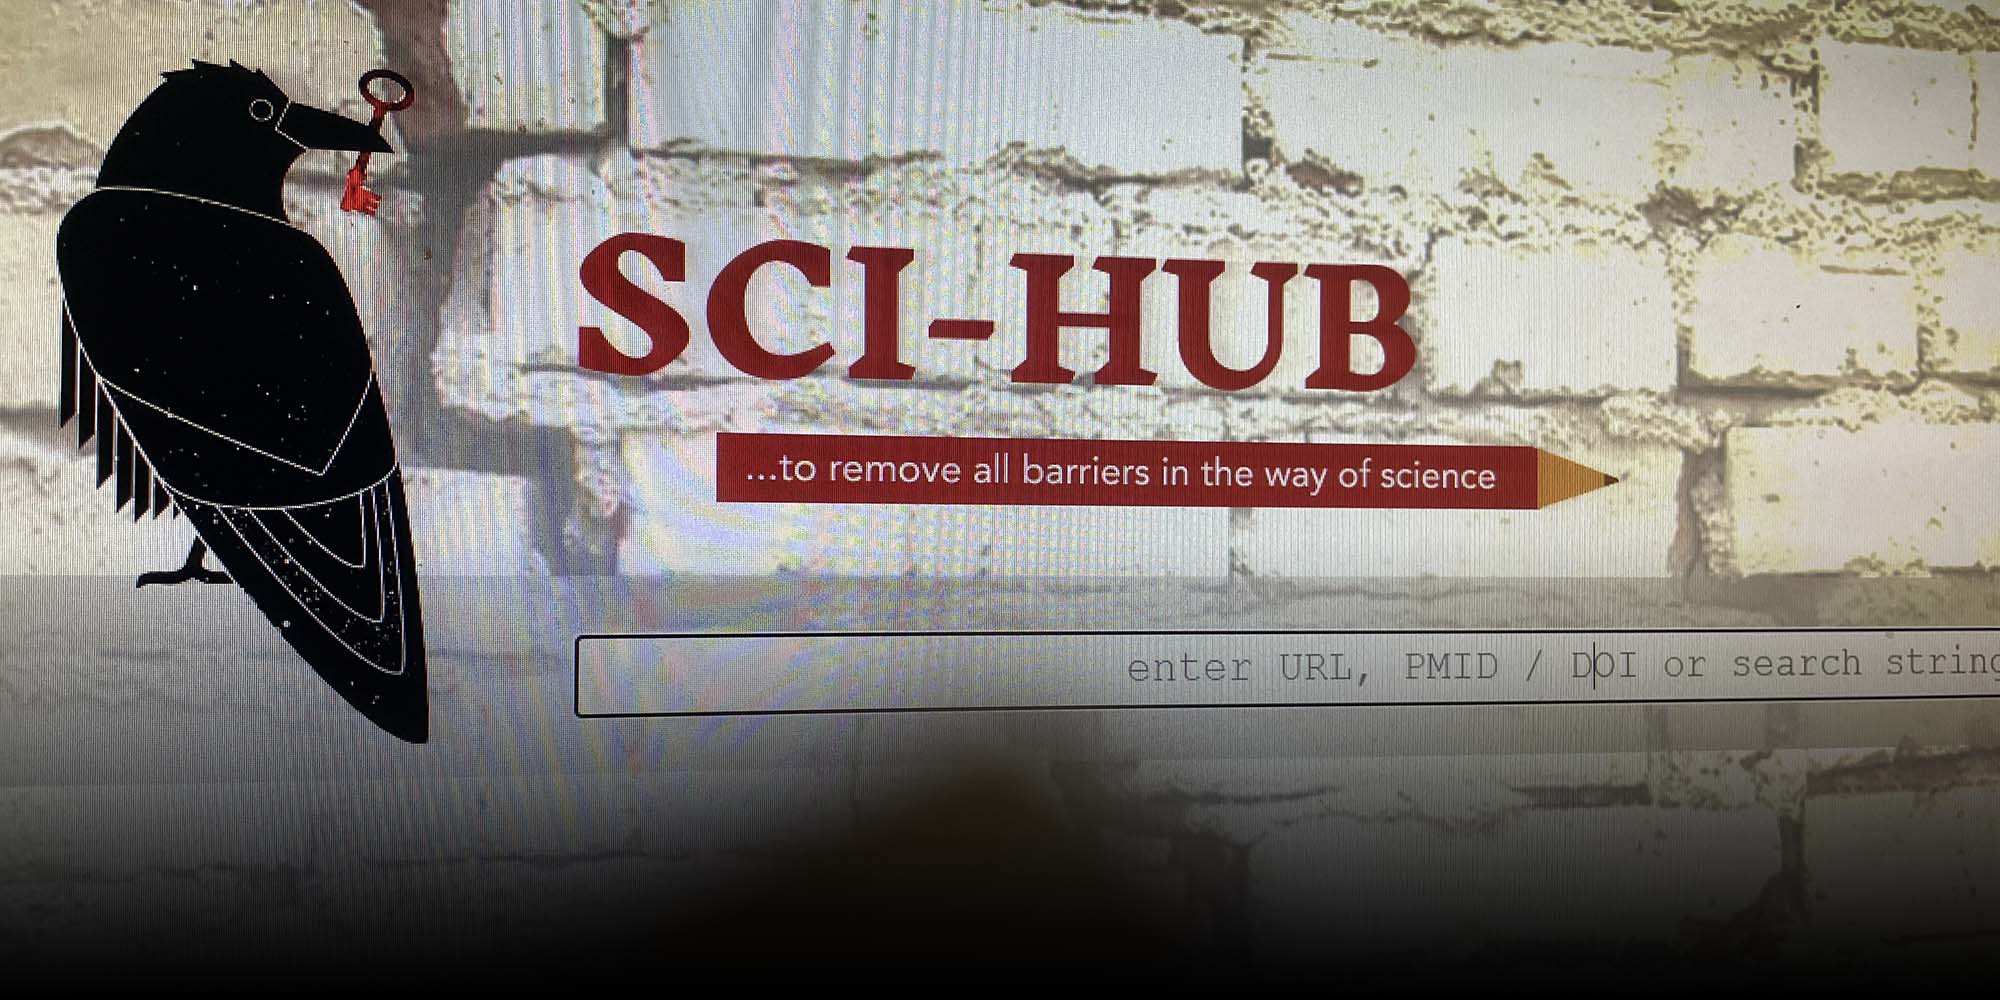 How is Sci-Hub funded?